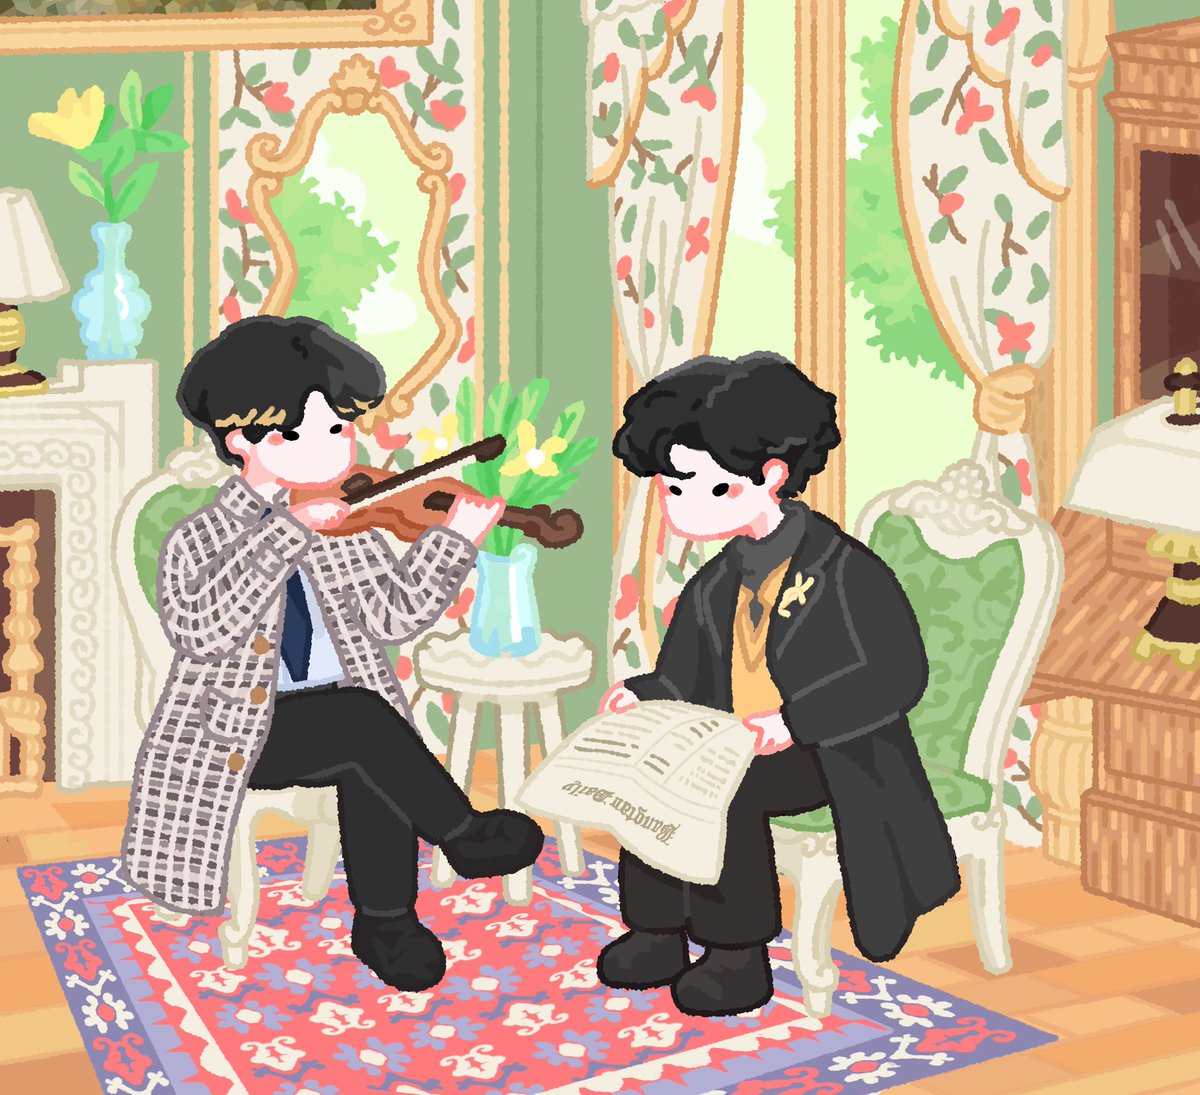 taehyung and jungkook in a victorian home 🎻